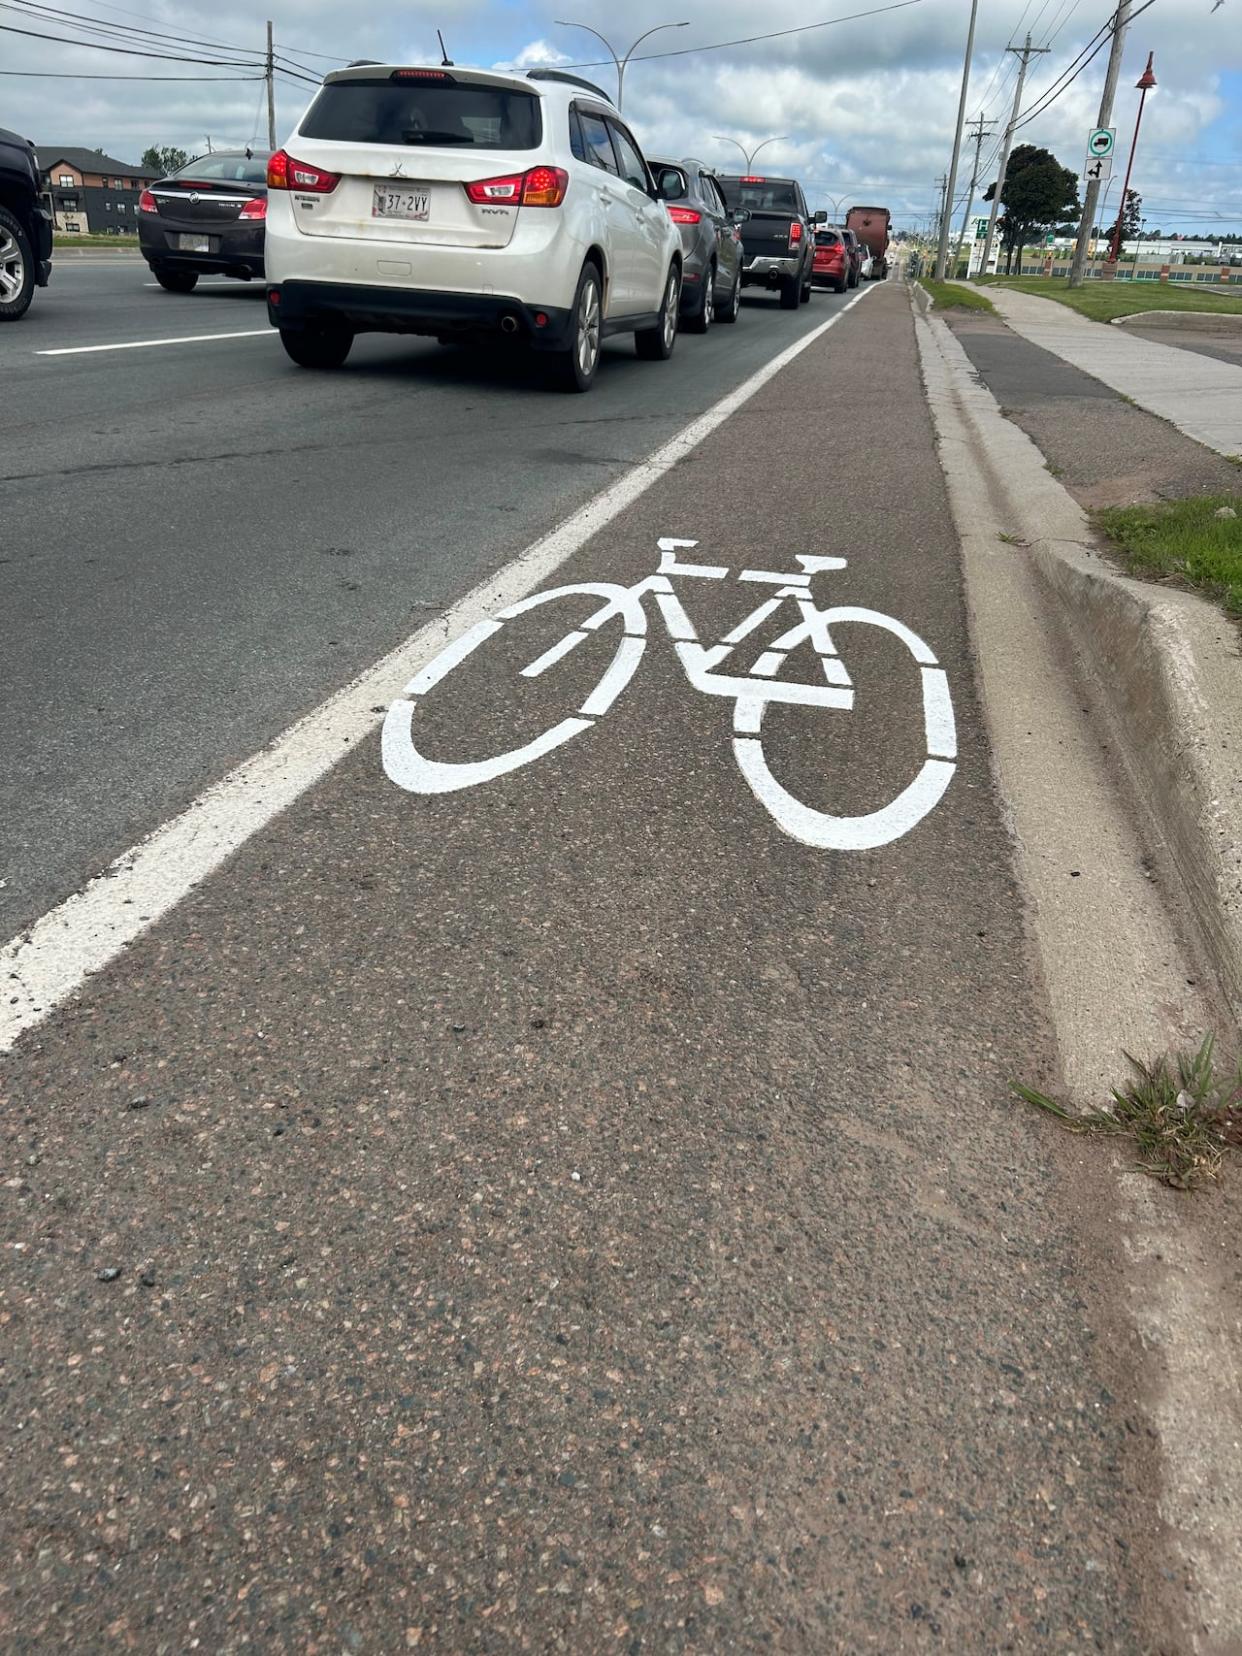 A bike lane symbol painted on University Avenue this week. (Laura Meader/CBC - image credit)